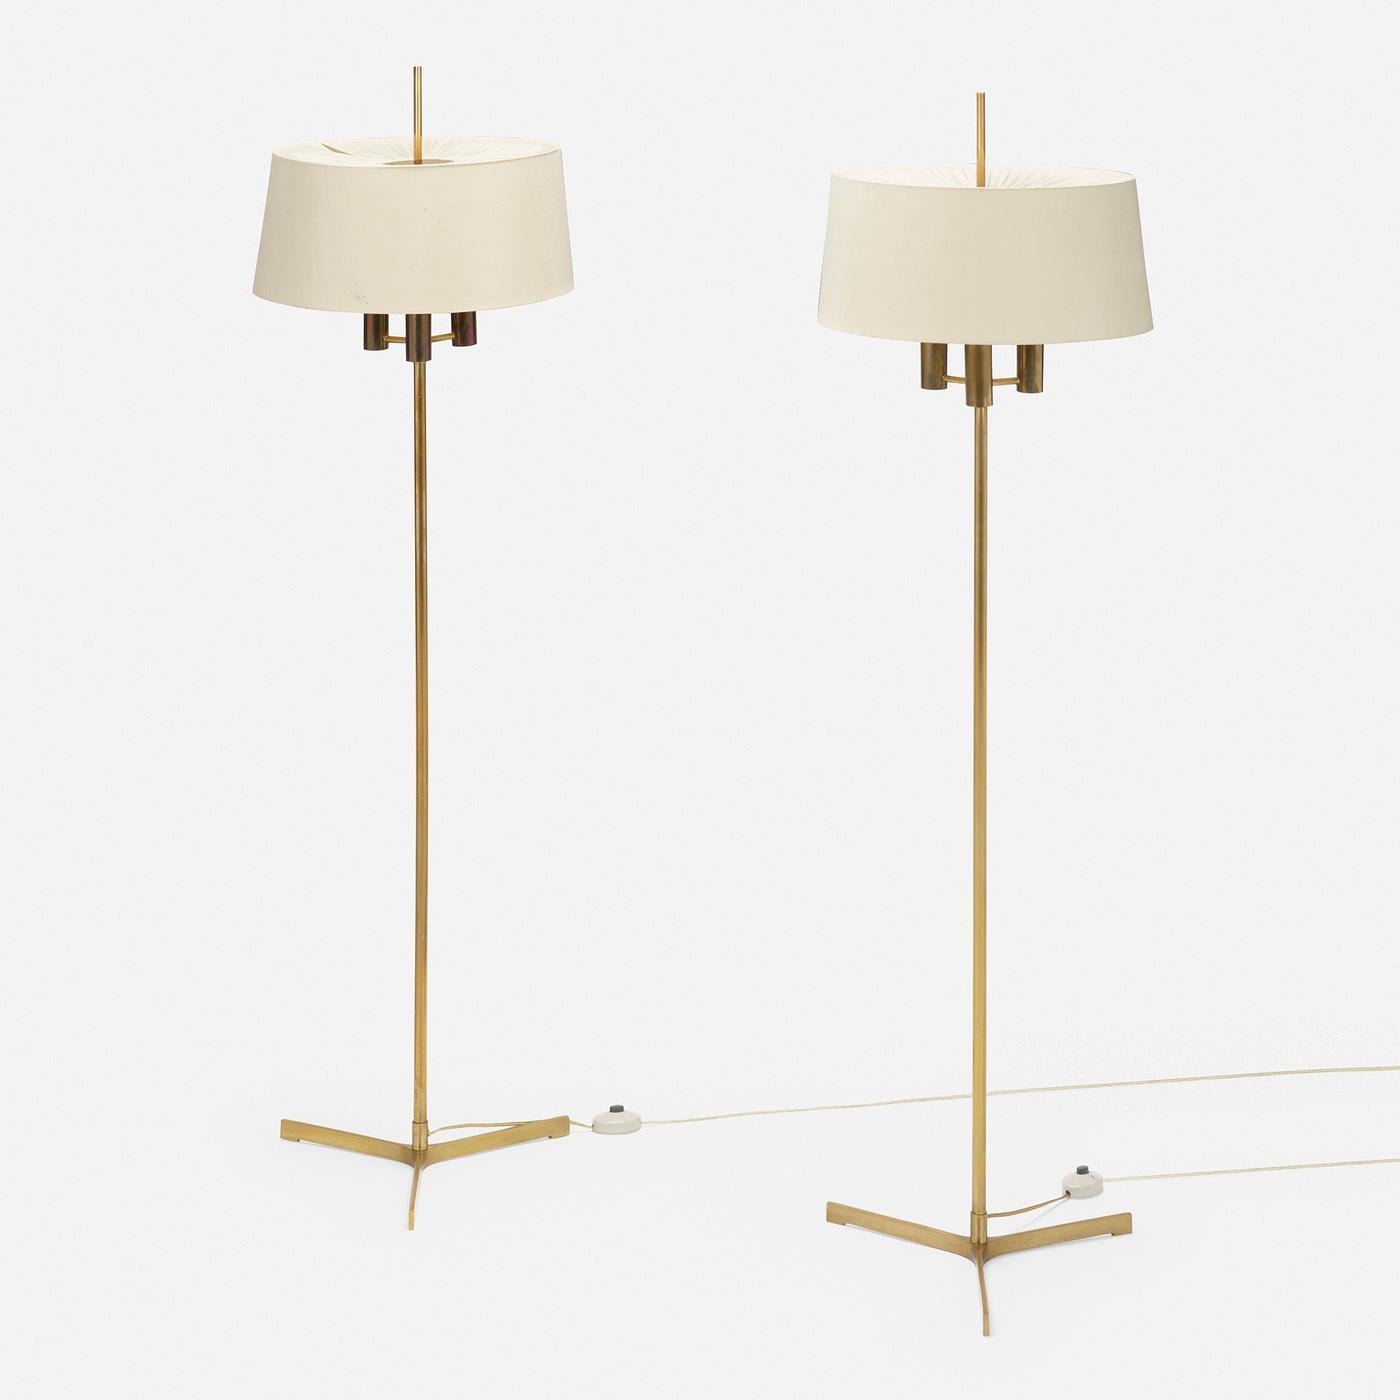 Pair of Floor Lamps by Svend Aage Holm Sørensen, circa 1950

Made by Holm Sørensen & Co., Denmark, c. 1950

Additional information:
Material: Brass, linen shades
Size: 17 Dia × 60 H Inches

Condition: Overall good, to very good condition. Wired for